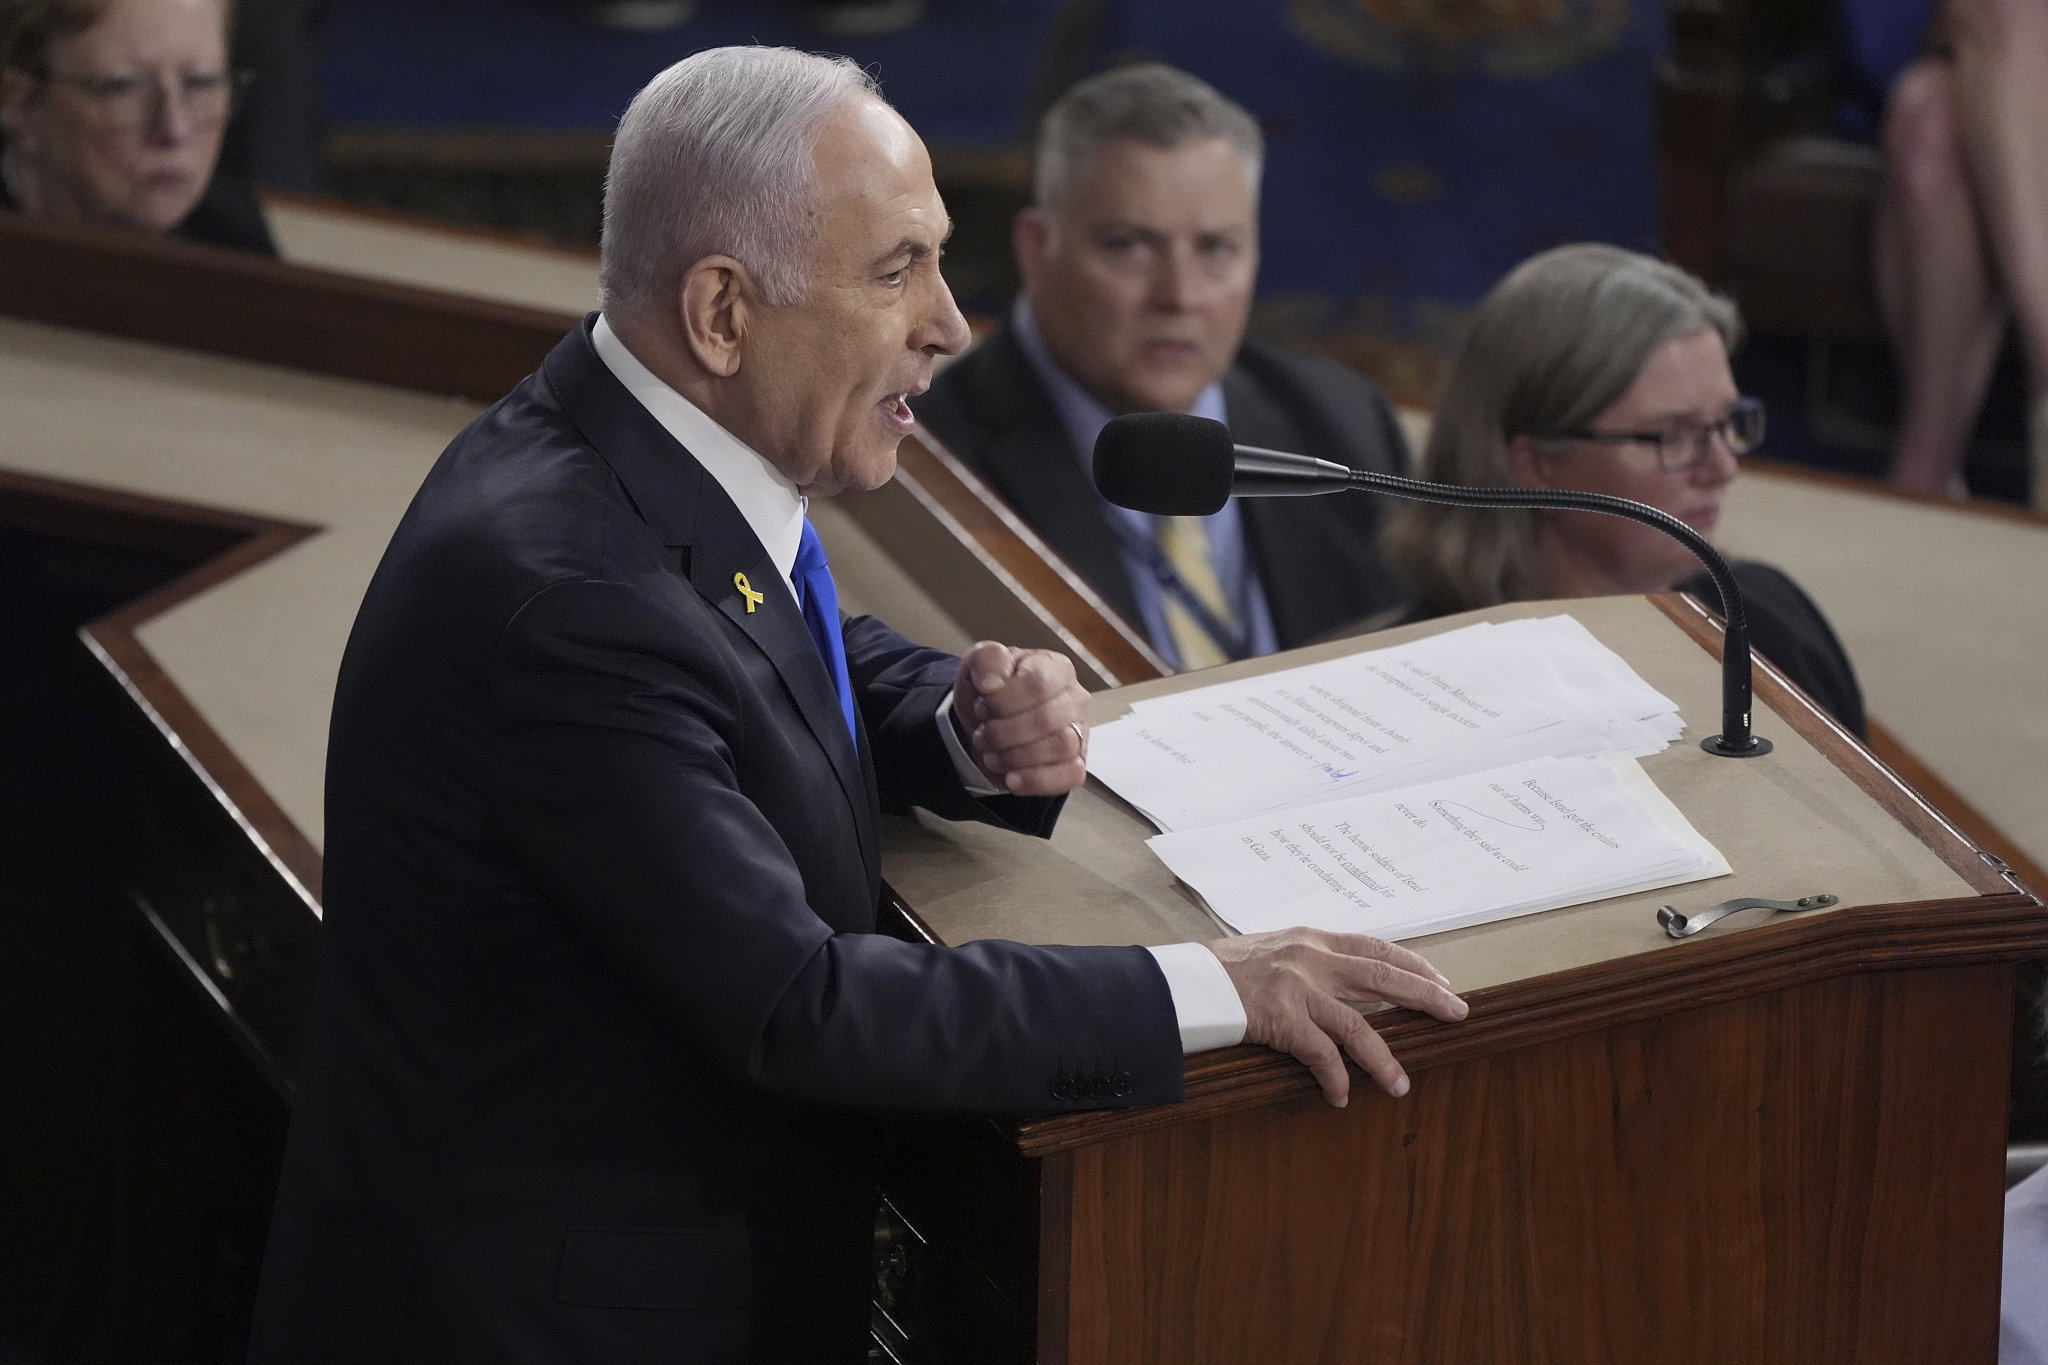 Israeli Prime Minister Benjamin Netanyahu speaks to a joint meeting of Congress at the Capitol in Washington D.C., pledging to achieve 